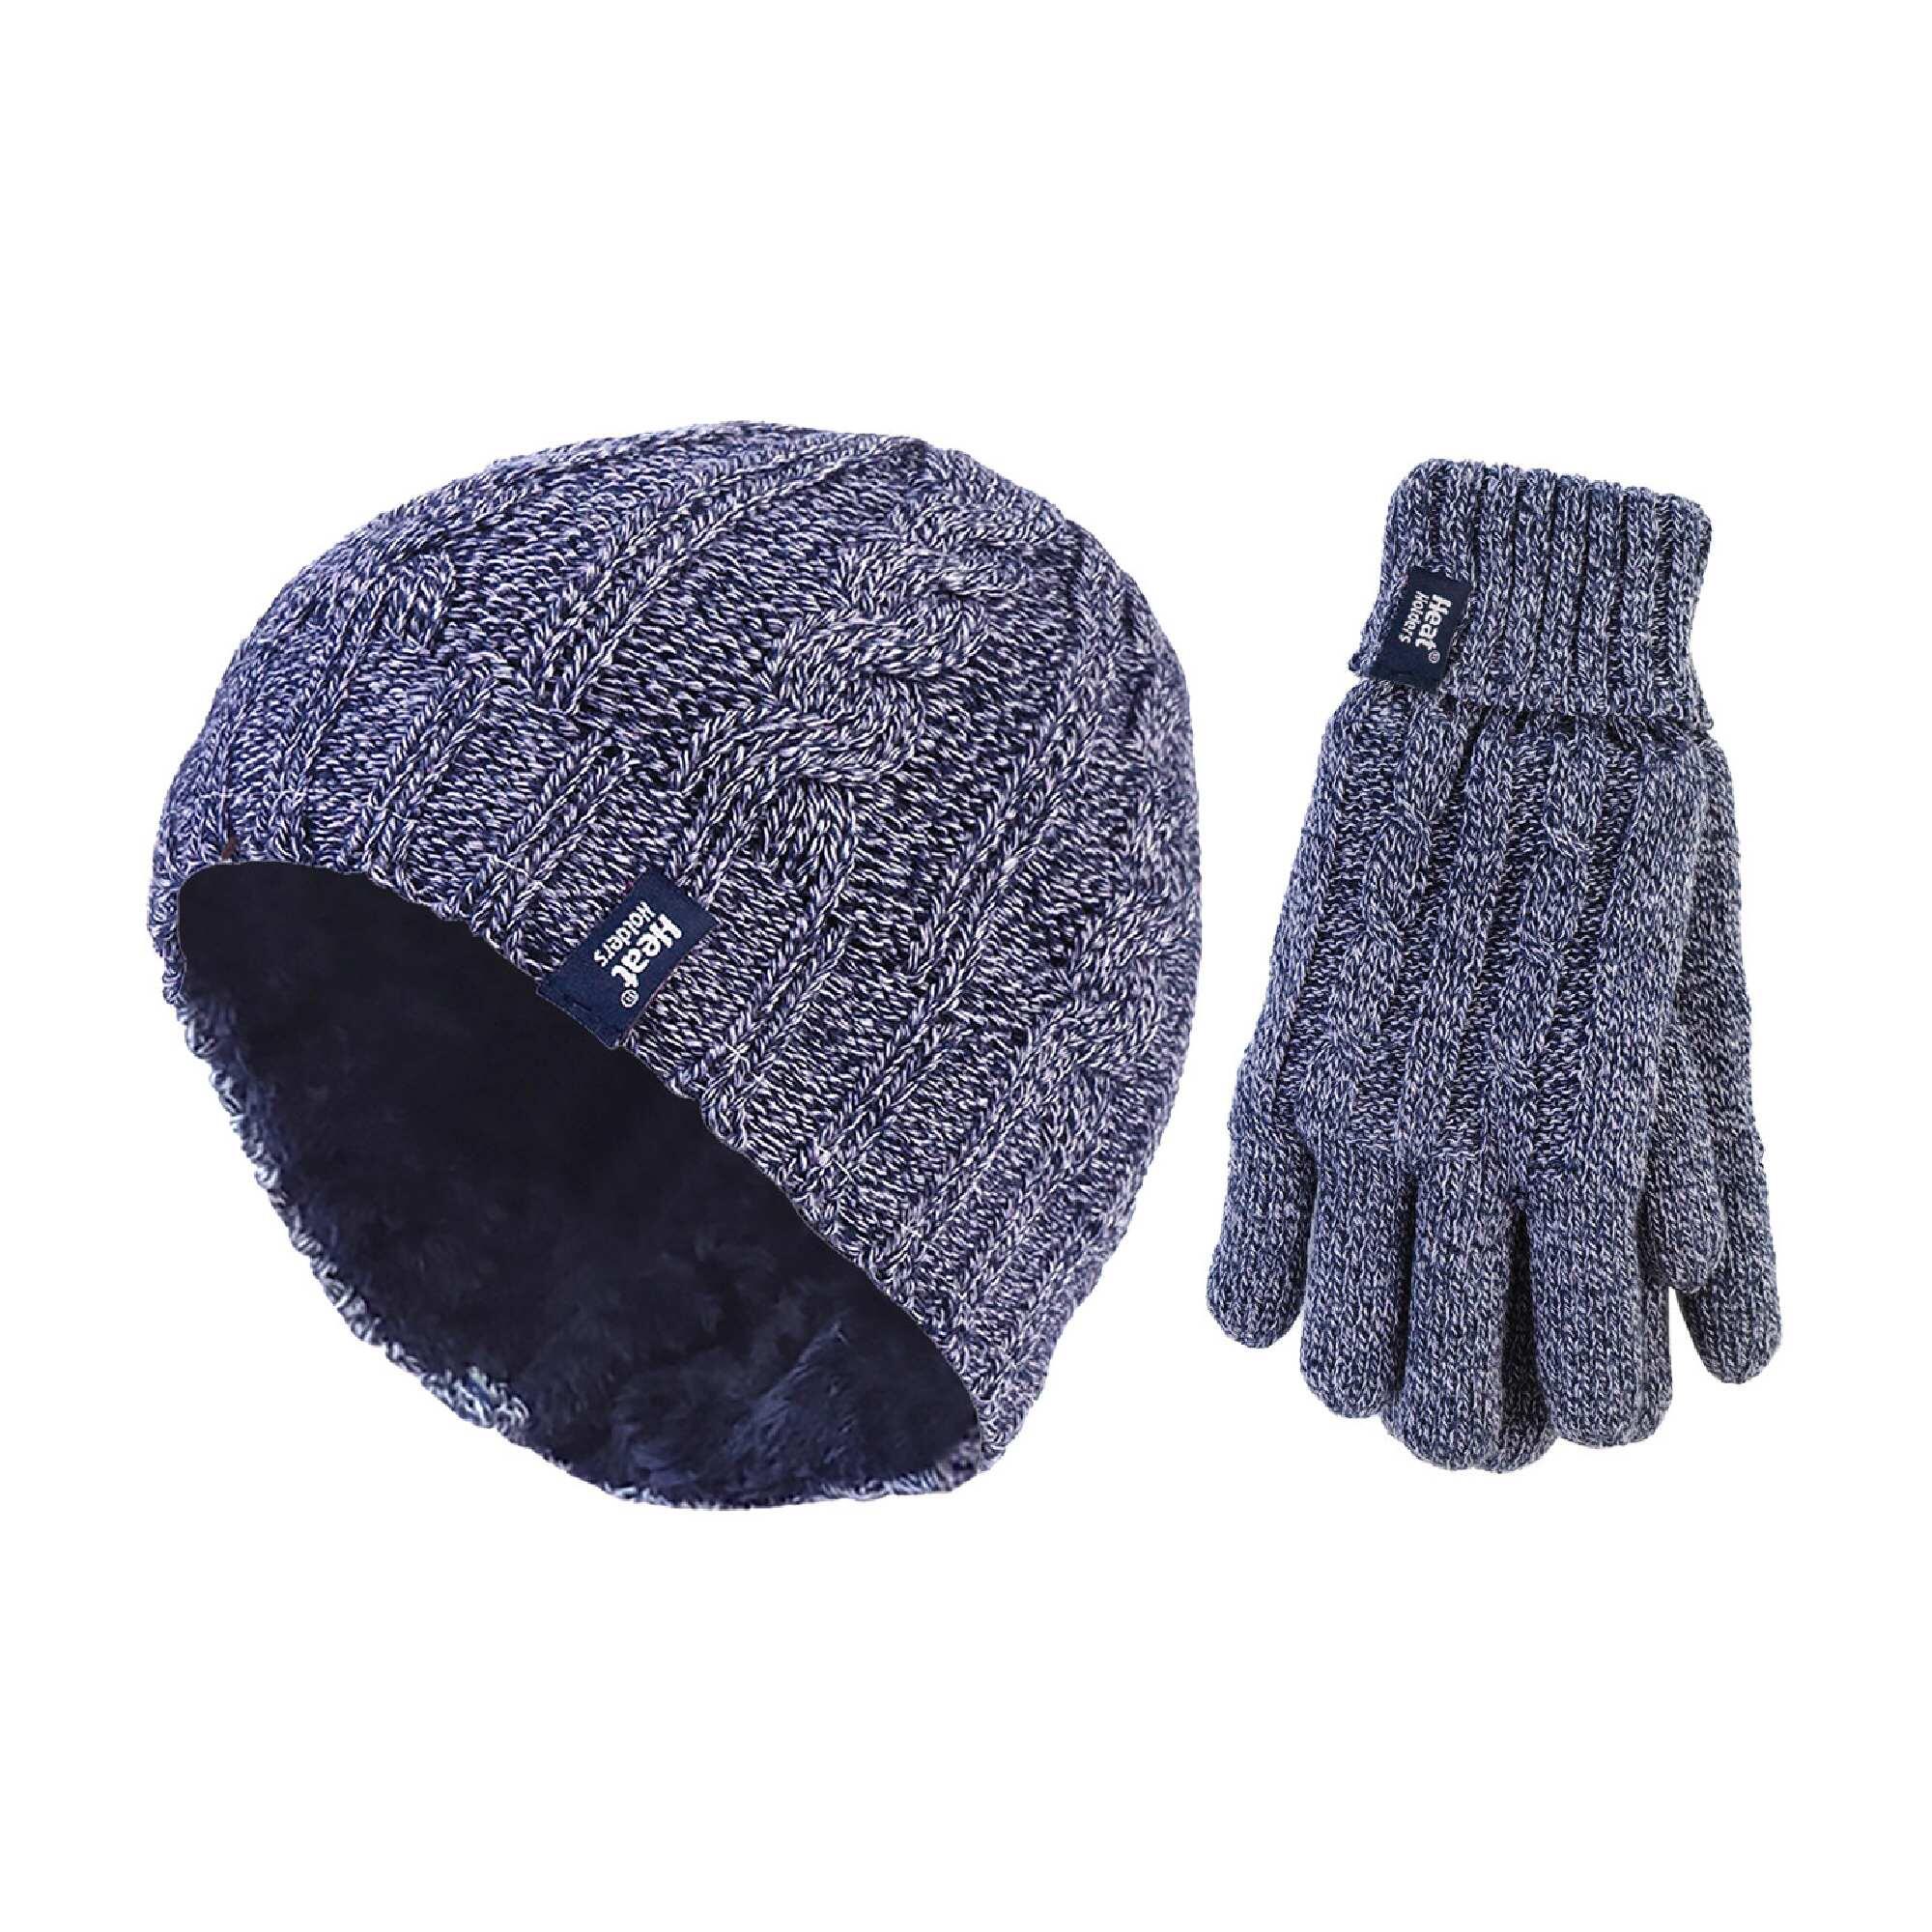 Ladies Fleece Lined Thermal Hat & Gloves Set for Winter 1/4